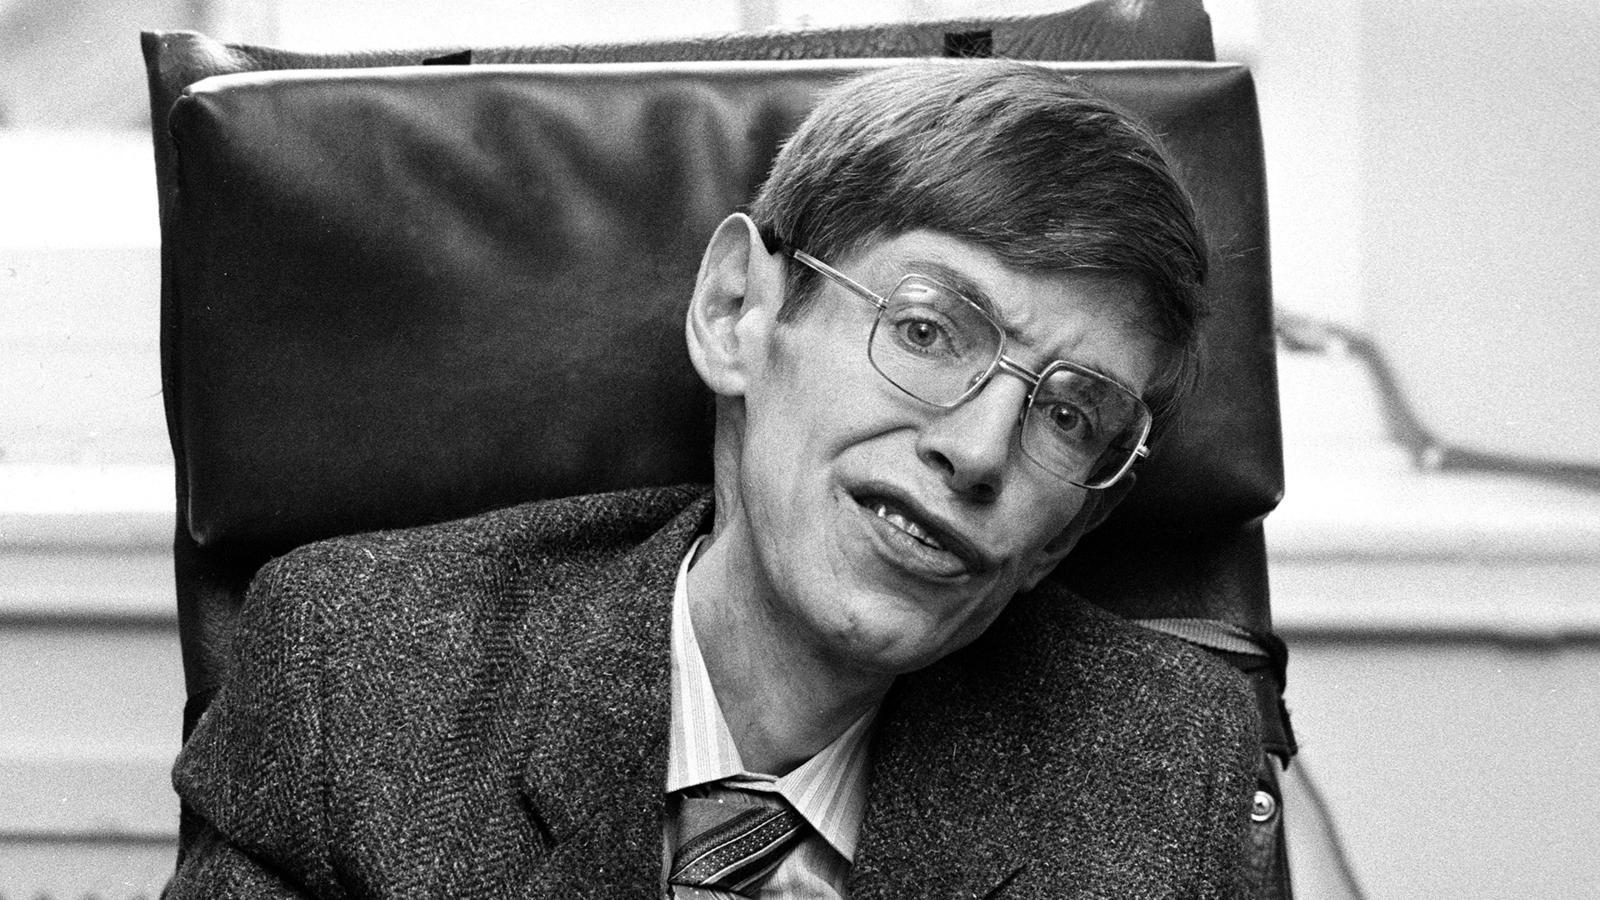 These are the discoveries that made Stephen Hawking famous. Young